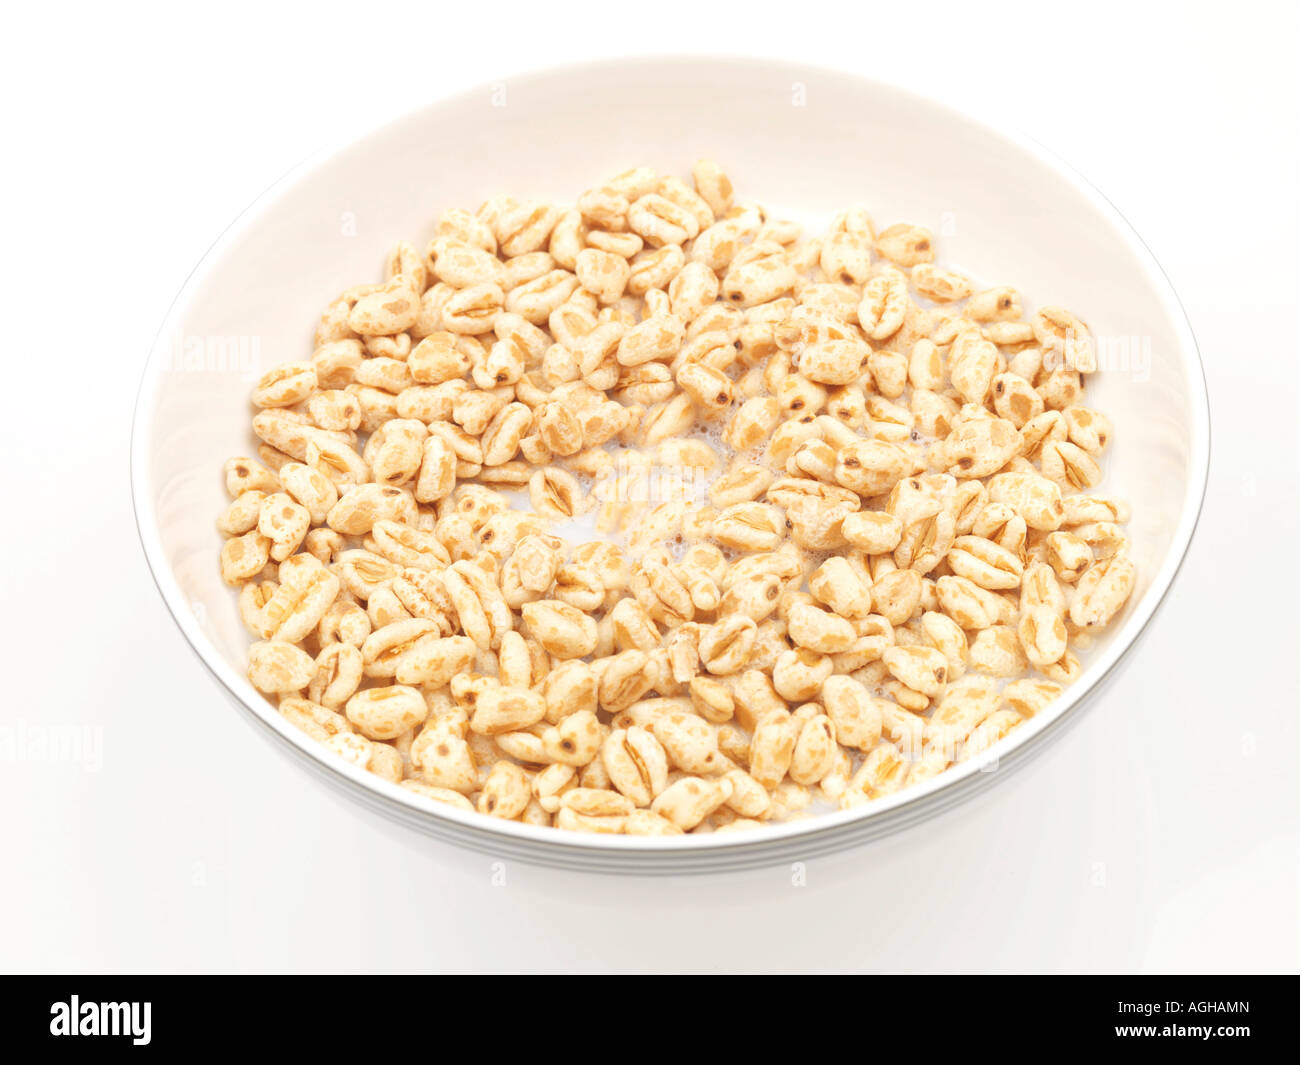 Puffed Wheat Cereal Stock Photo